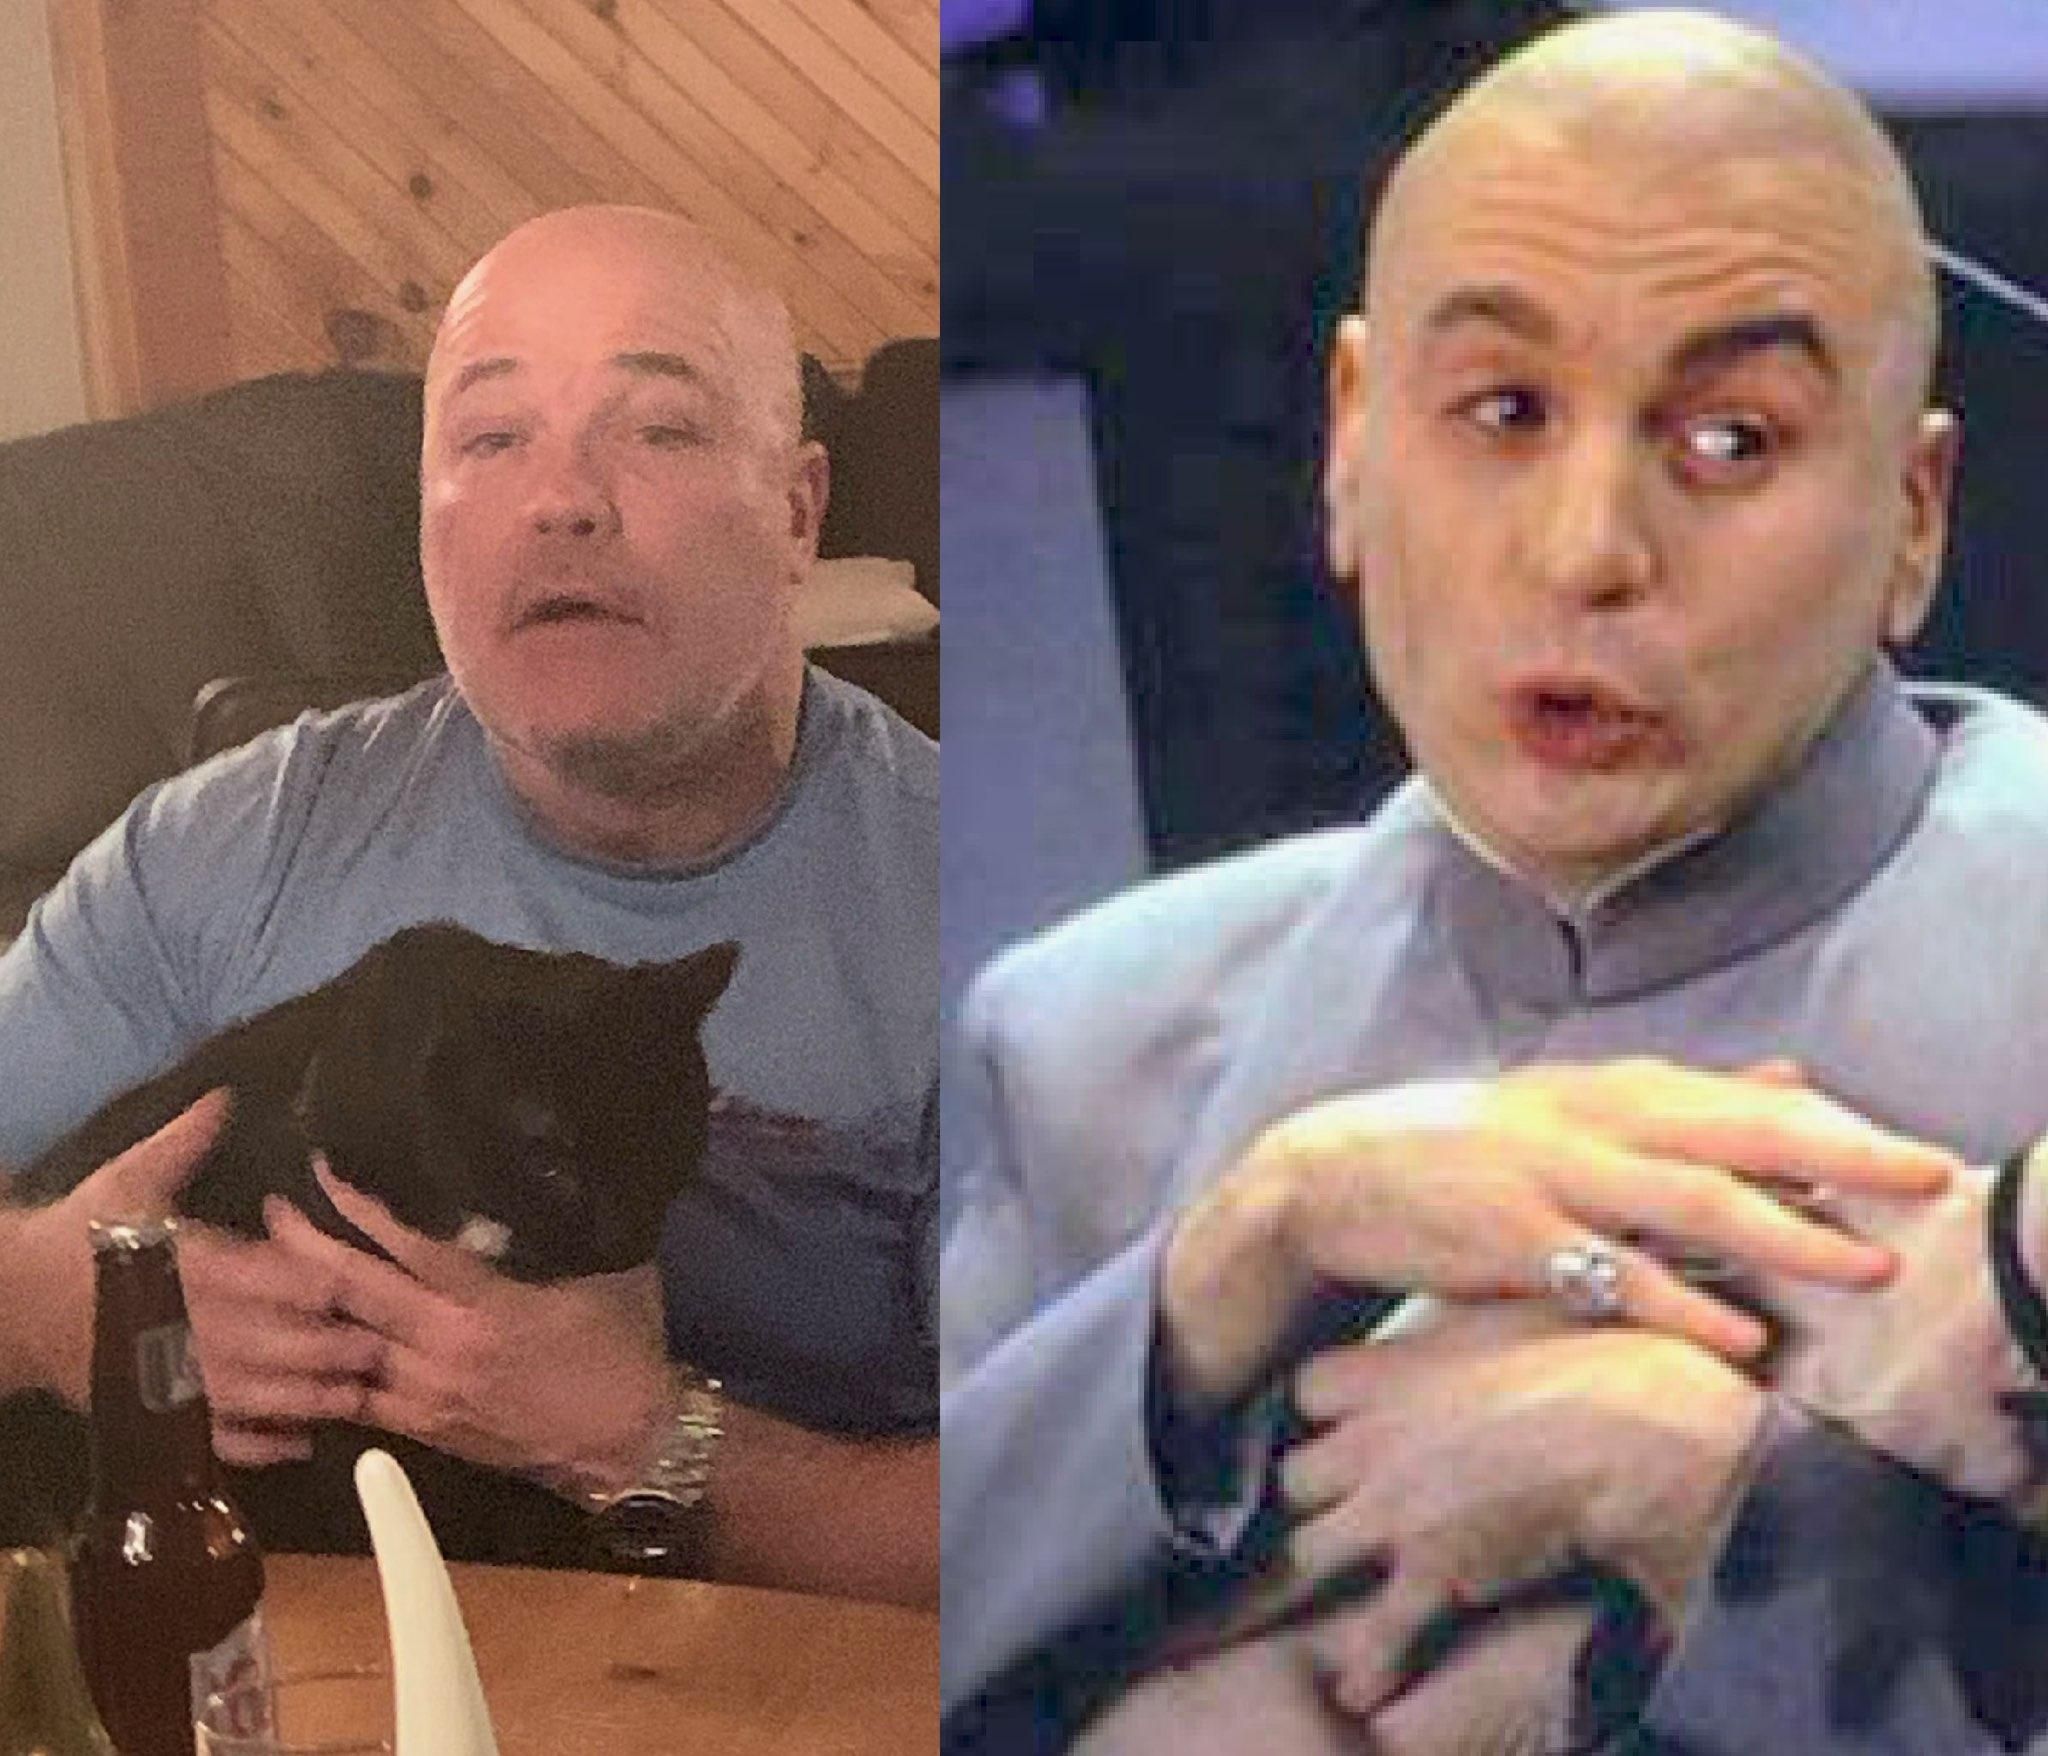 My family all had edibles for Easter, and my dad definitely had a striking resemblance to someone.